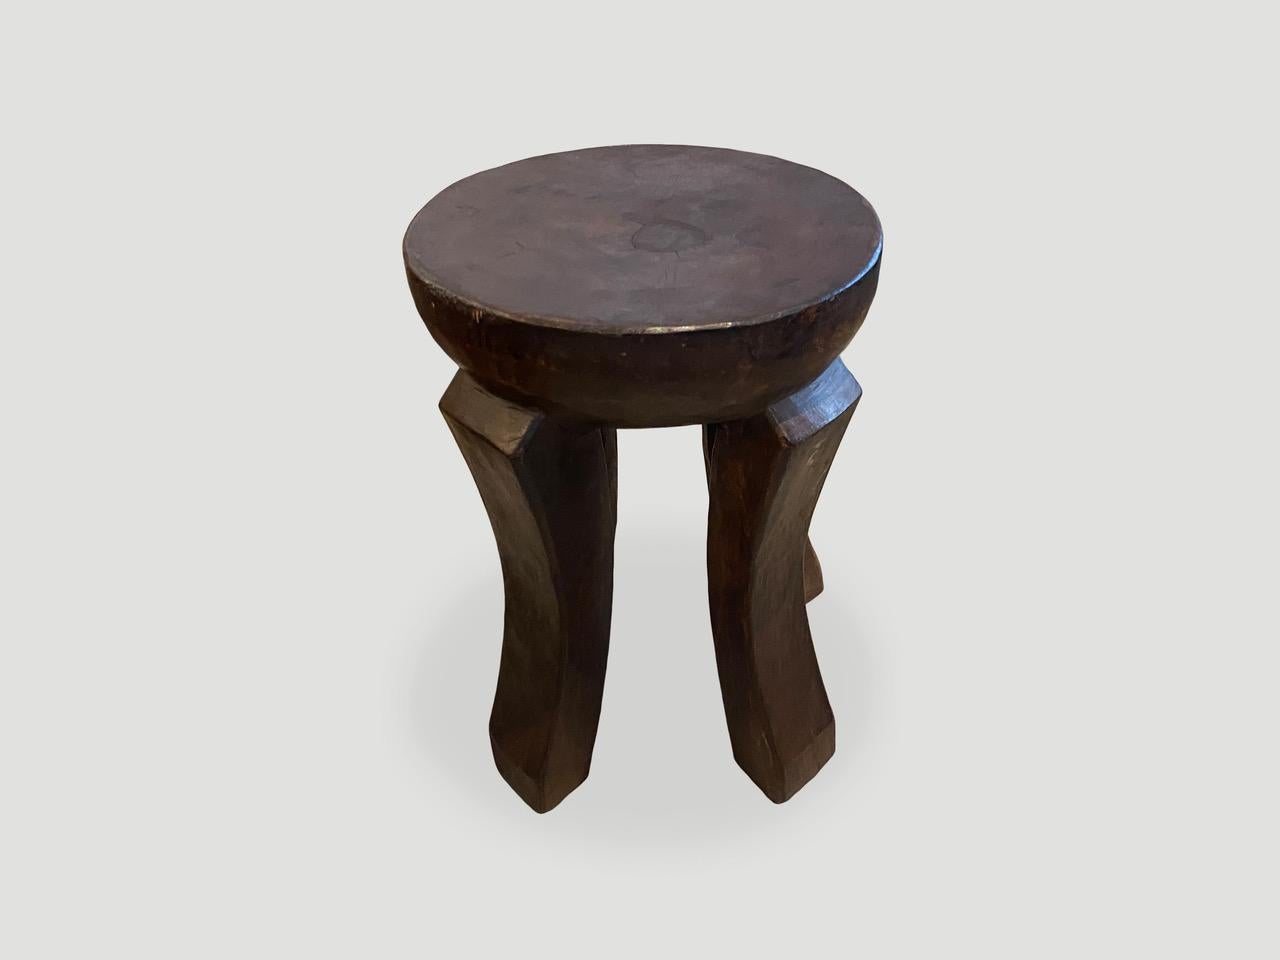 Tribal Andrianna Shamaris African Side Table or Stool For Sale